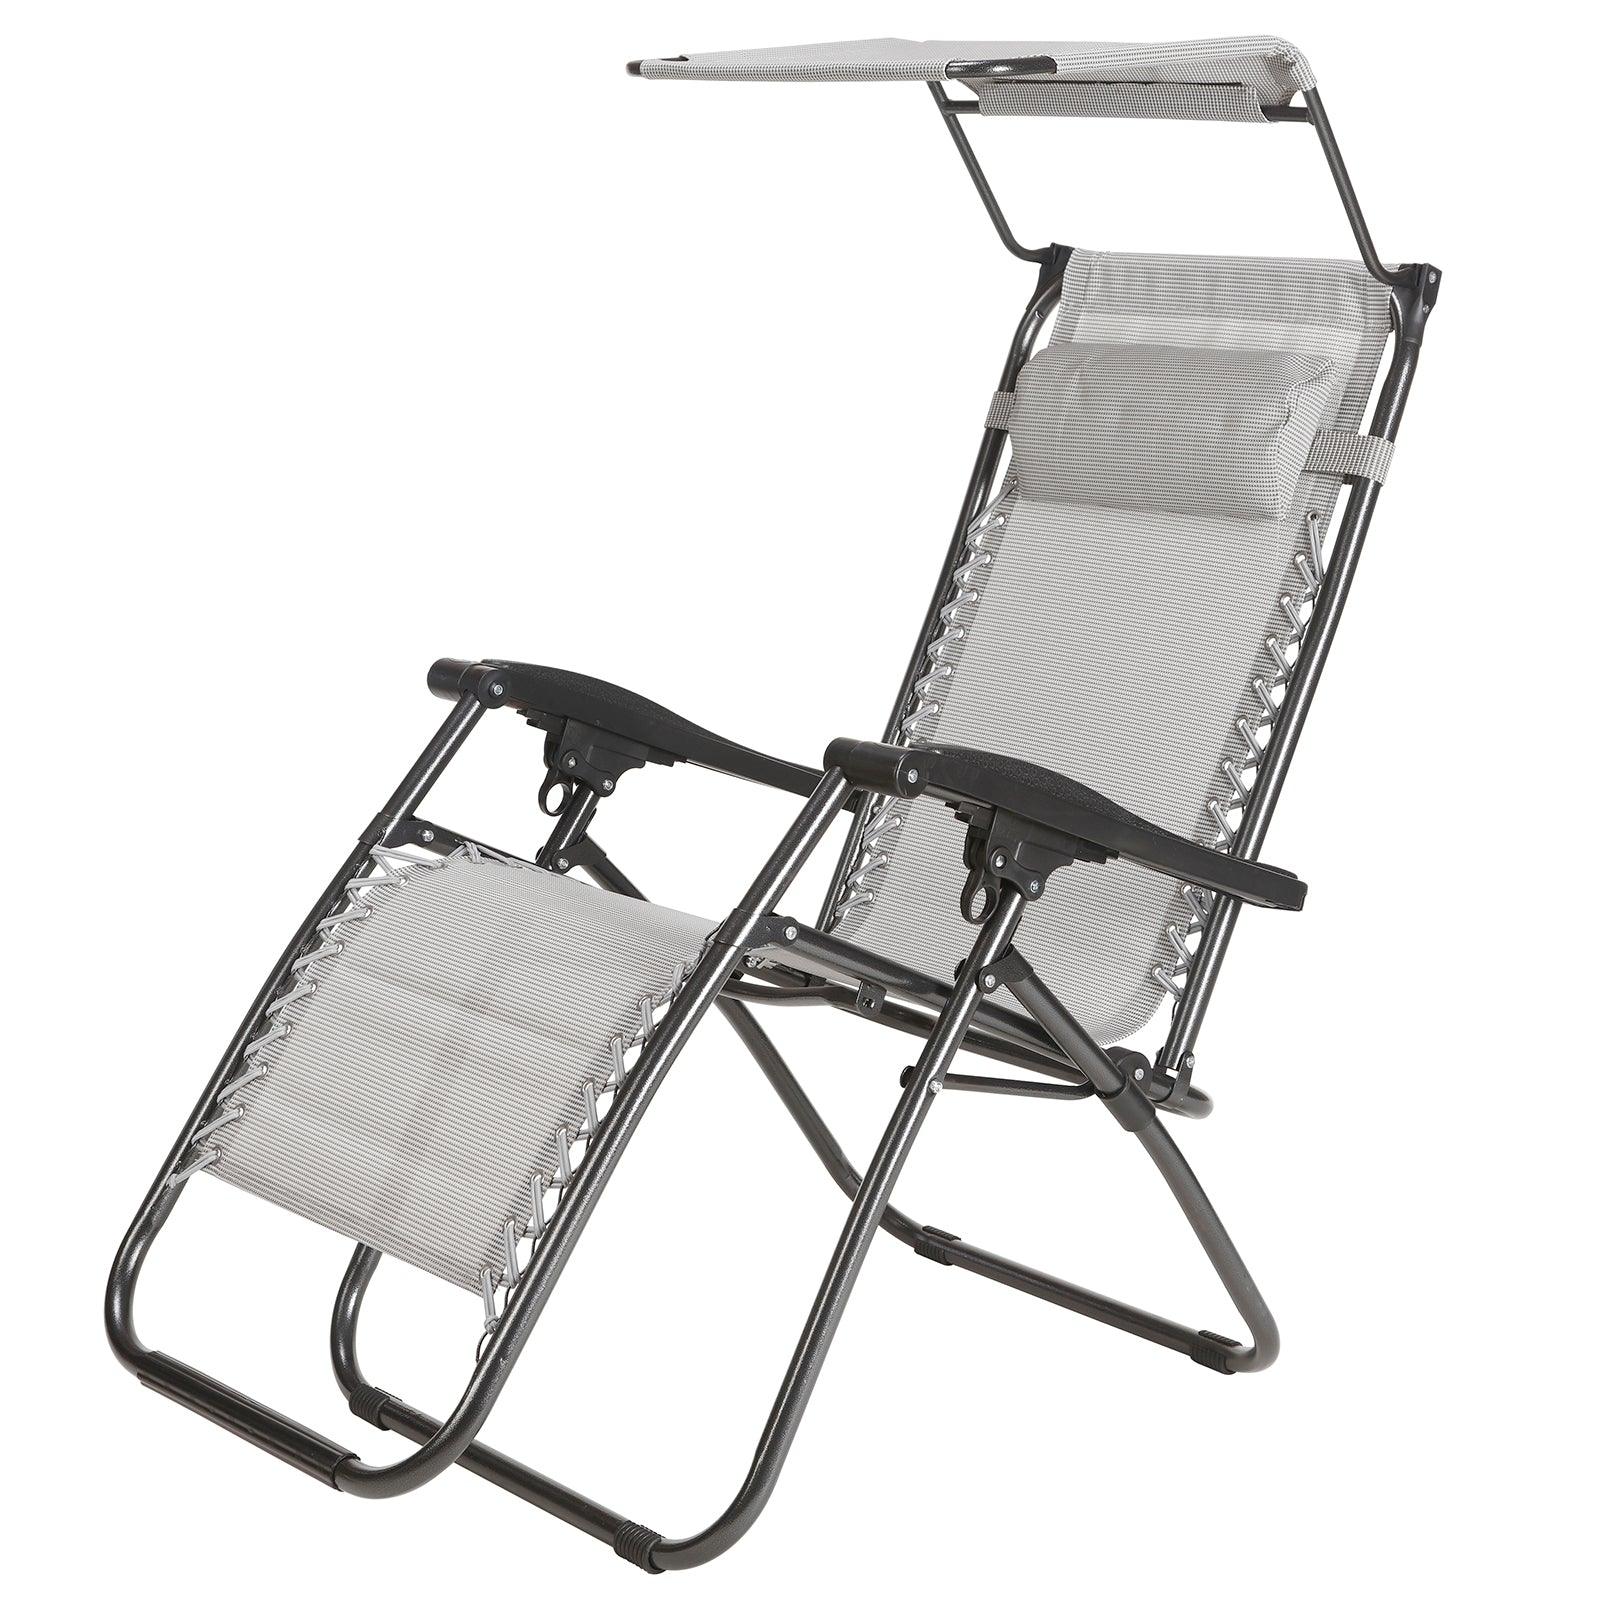 2 Grey Beach Chairs With Cup / Magazine Holders - Charming Spaces